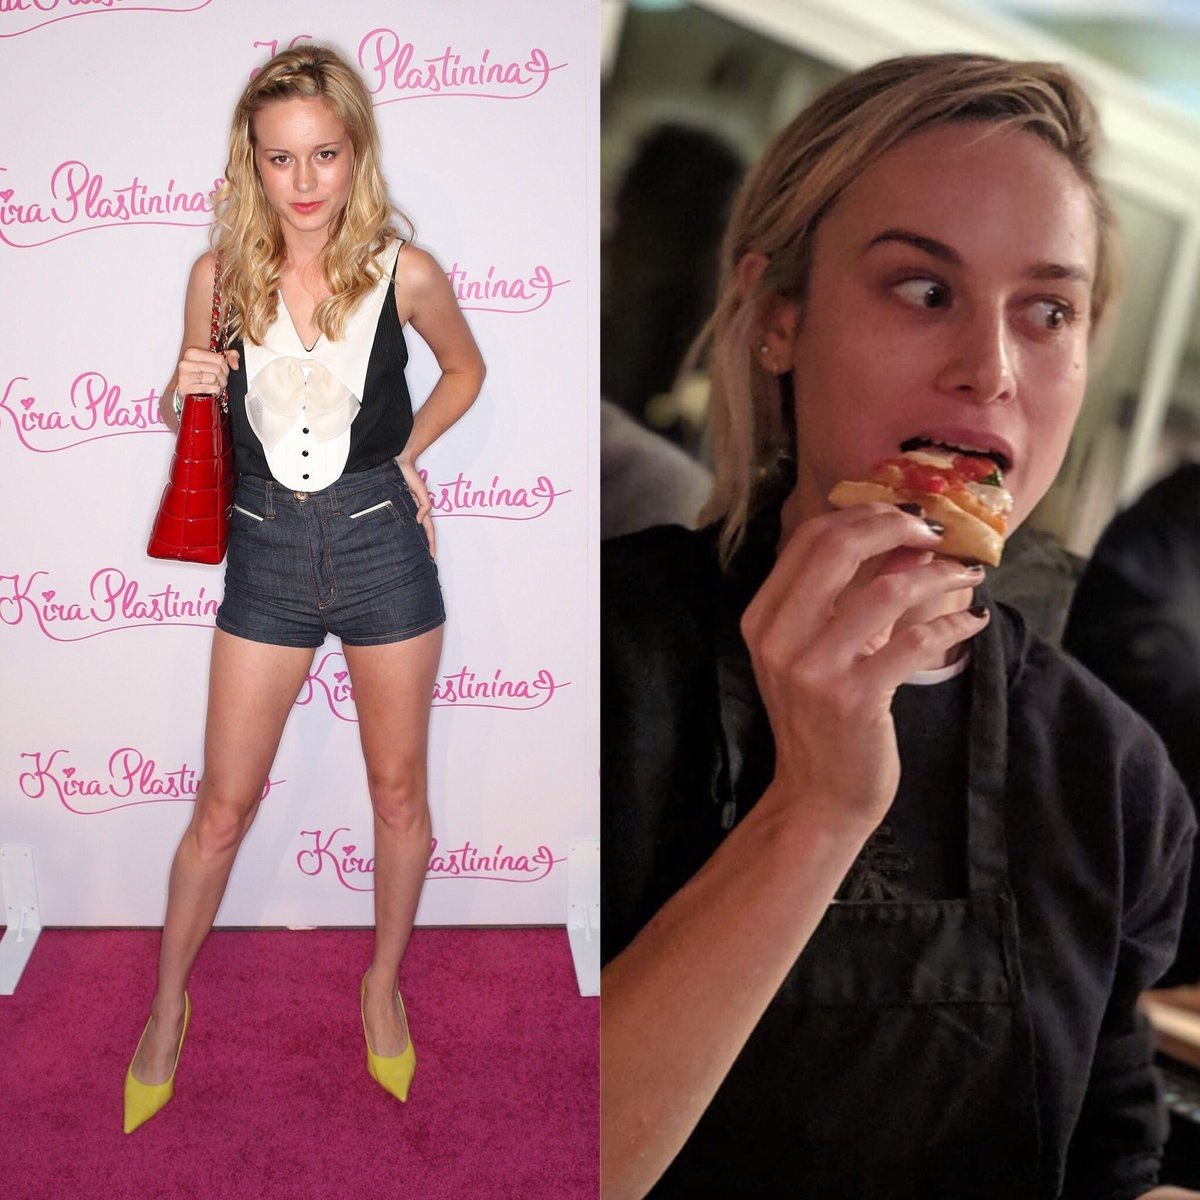 Actress Brie Larson accepted the 10-year challenge by posting a photograph of herself eating pizza alongside a picture of how she looked 10 years ago.